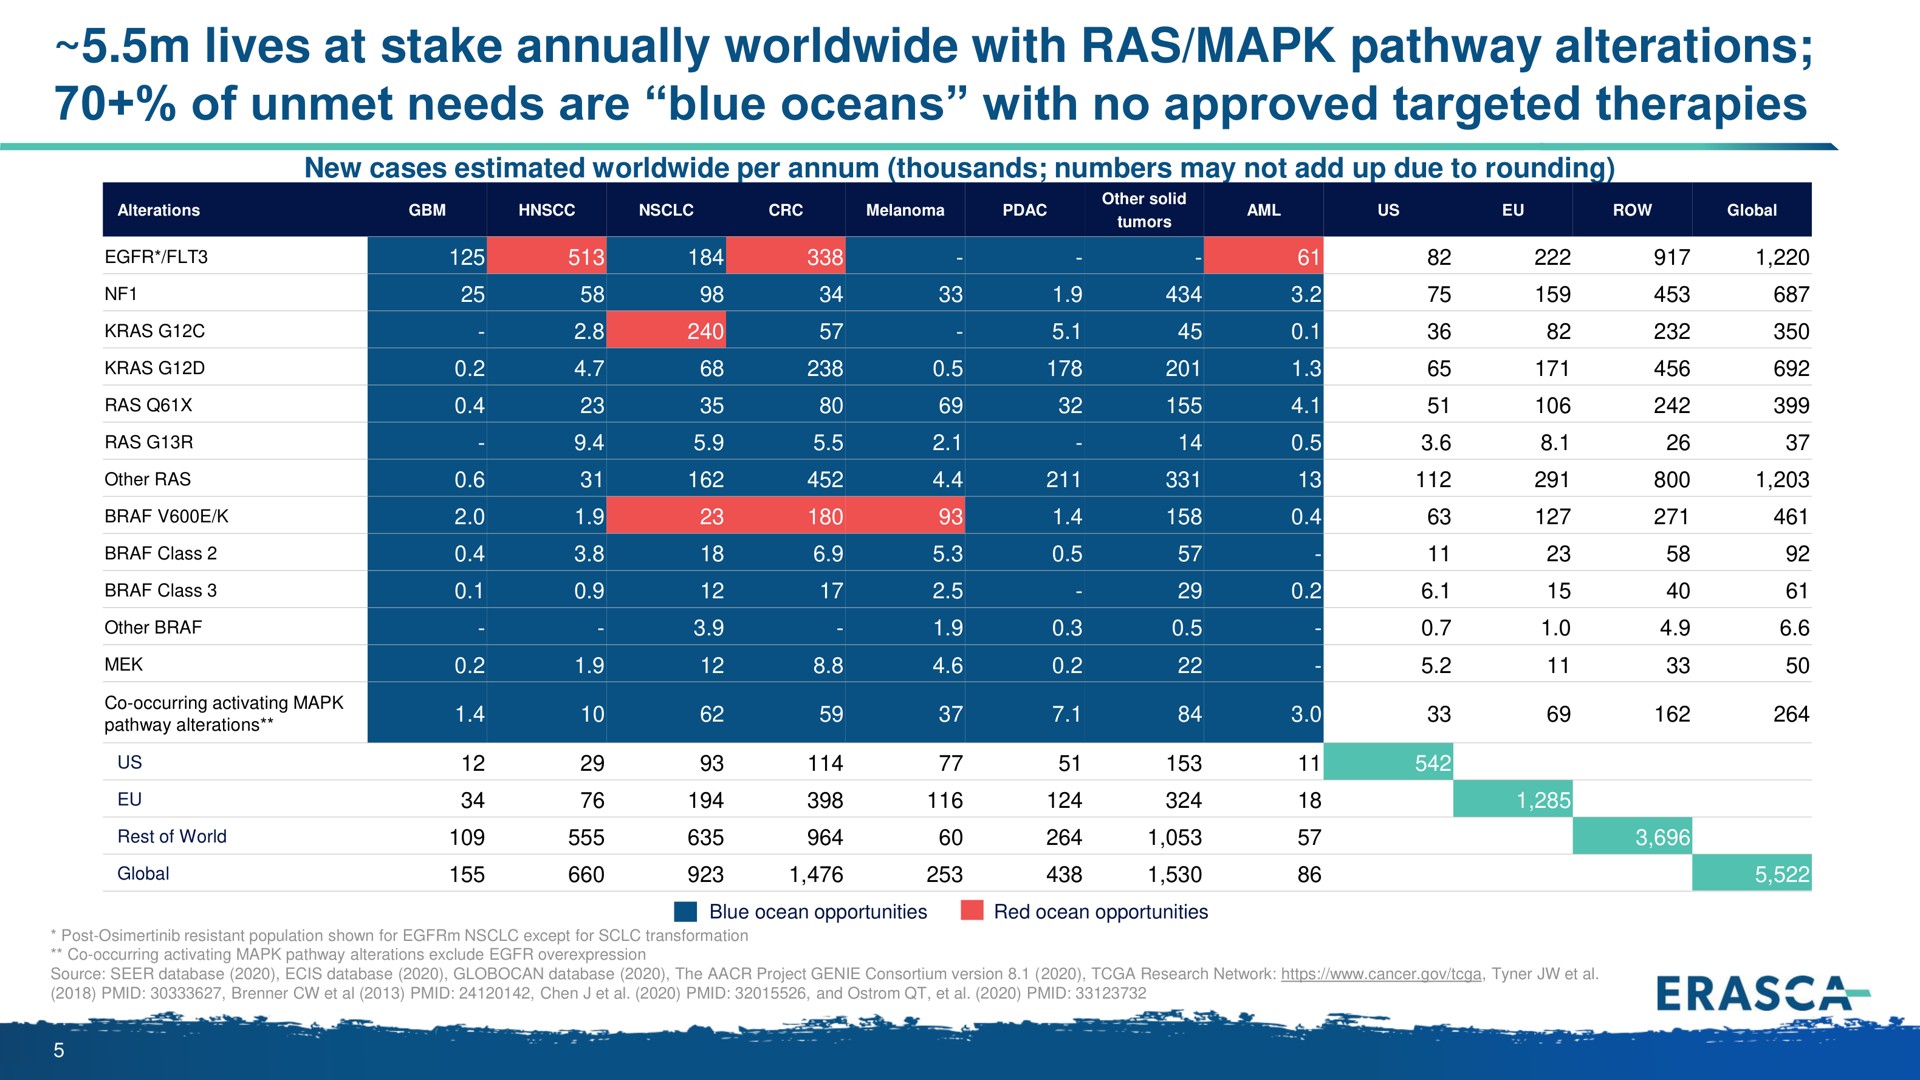 lives at stake annually with ras pathway alterations of unmet needs are blue oceans with no approved targeted therapies | Erasca